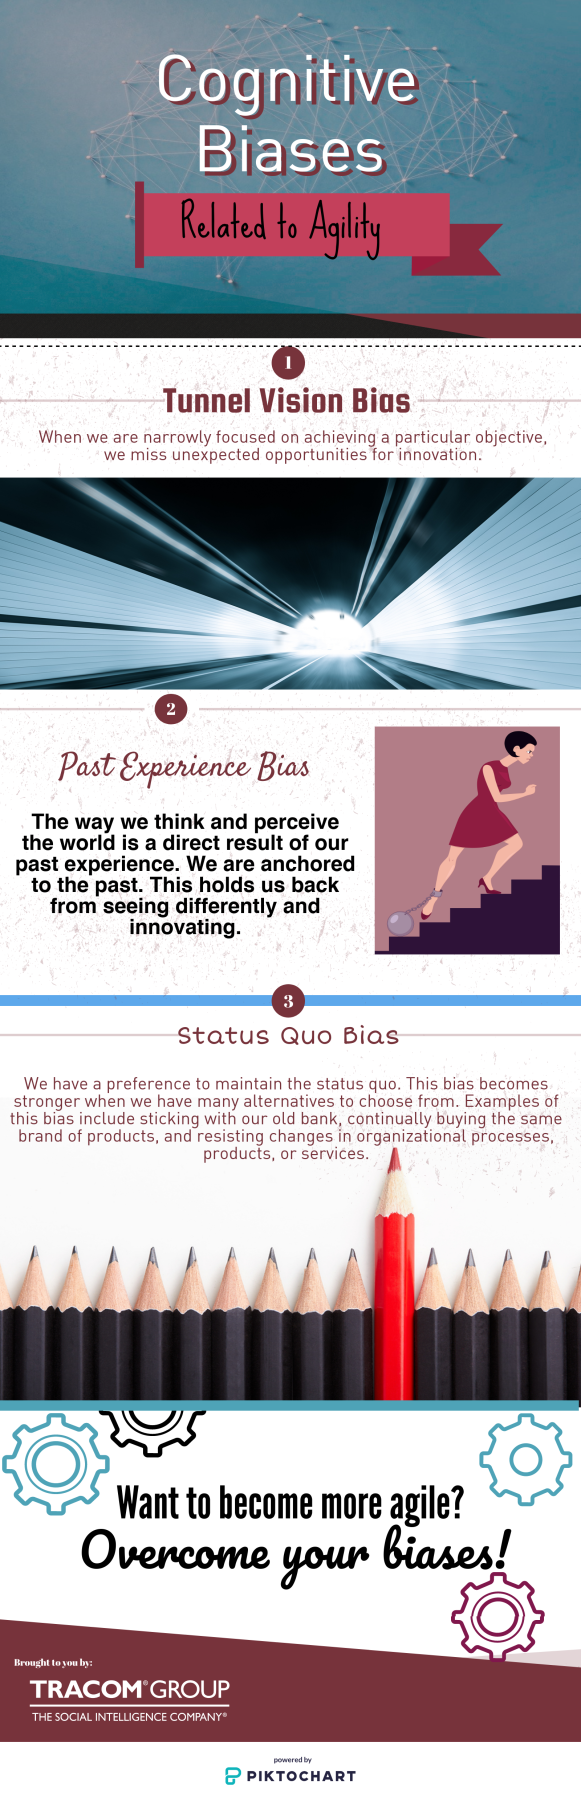 Cognitive Biases Related to Agility Infographic